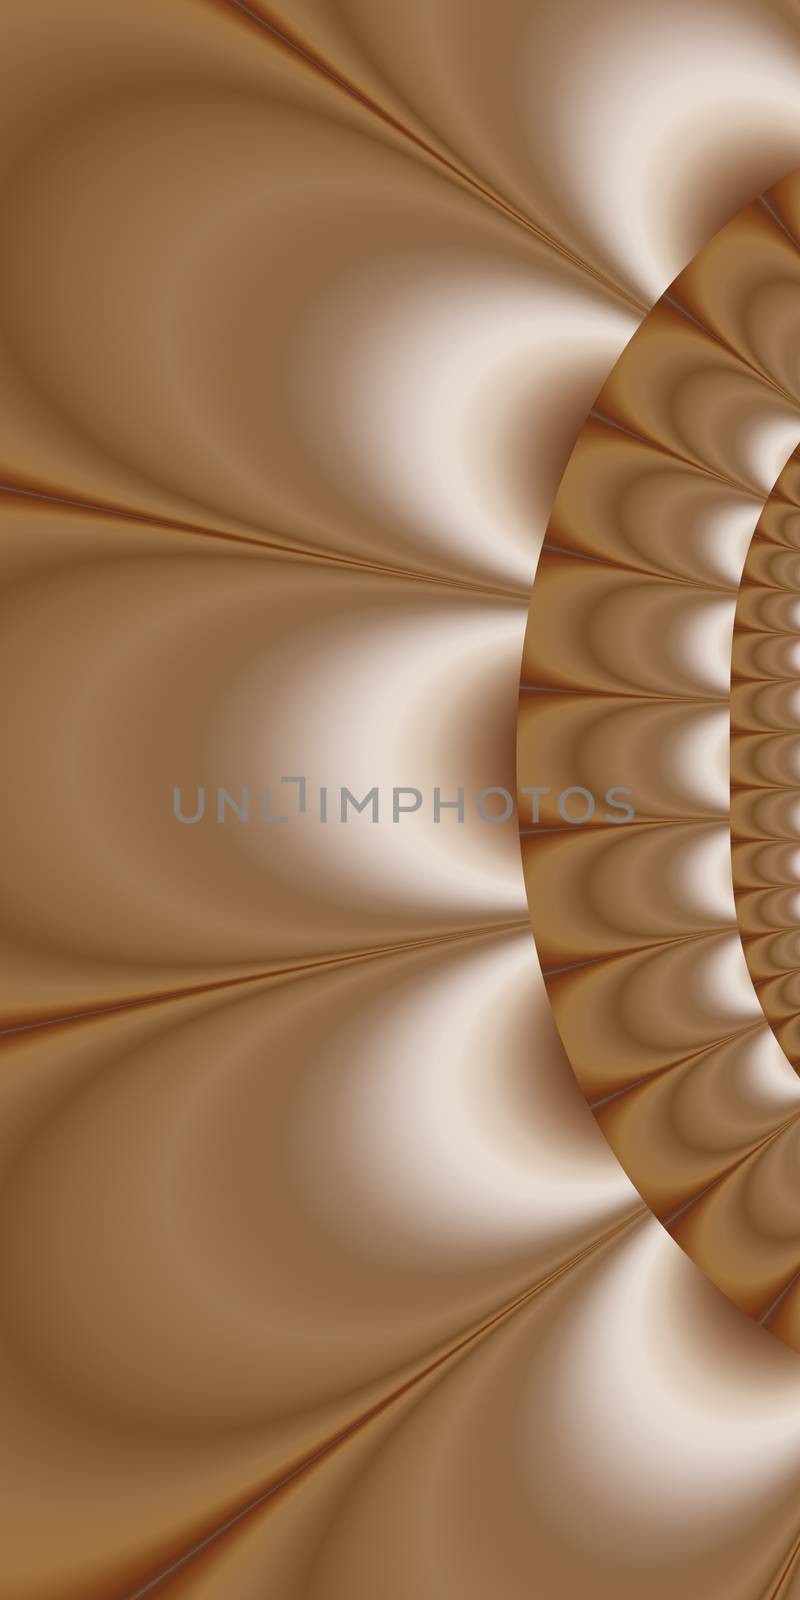 An abstract fractal design representing silk or velvet material in brown and creamy white colors.